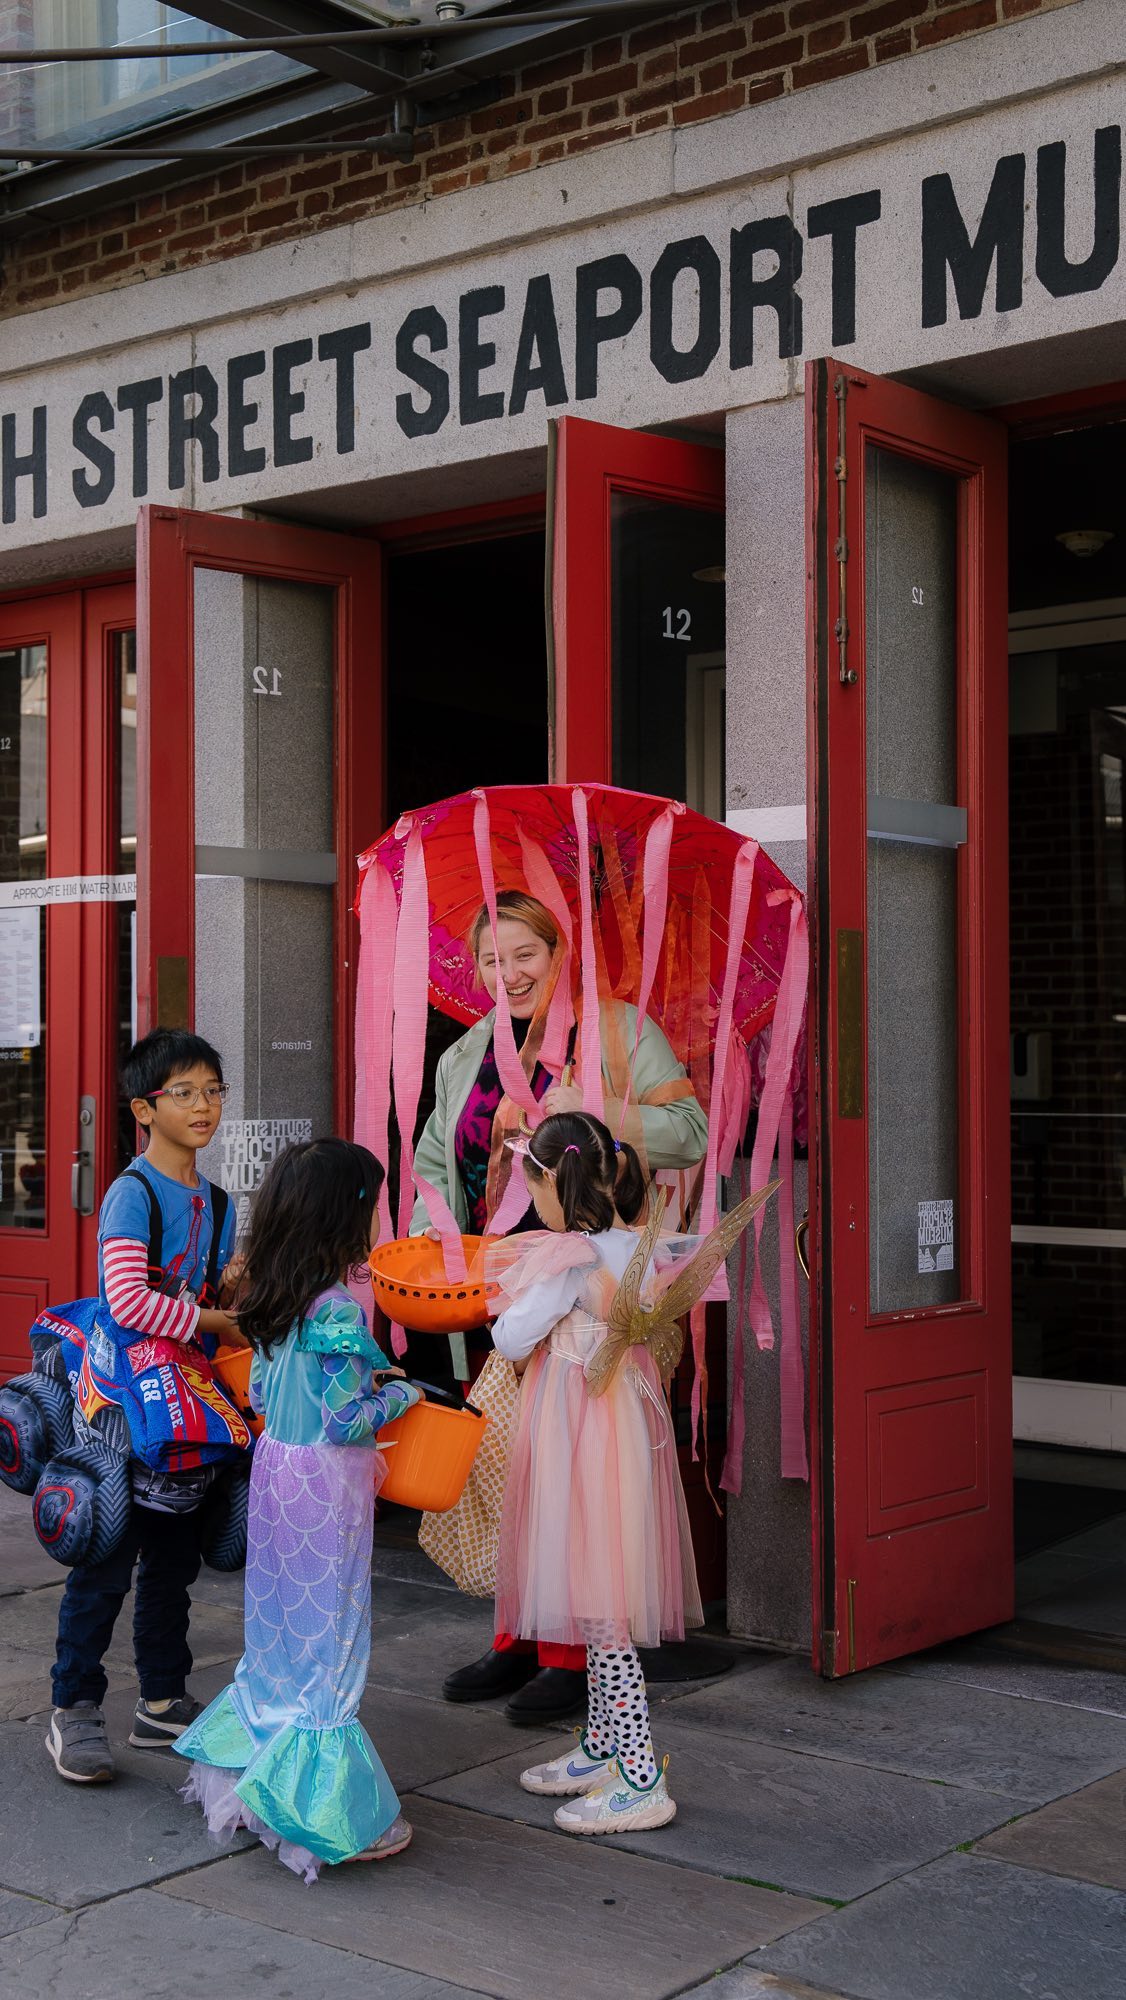 No tricks, all treats! Suit up the kids and come on down for the Seaport Kids x Halloween Block Party next weekend 🕸️ 🗓️ Sat, 10/28  11:00am – 1:00pm  Fulton & Front Street Seaport Kids is presented by @nyphospital Details ➤ link in bio #TheSeaport